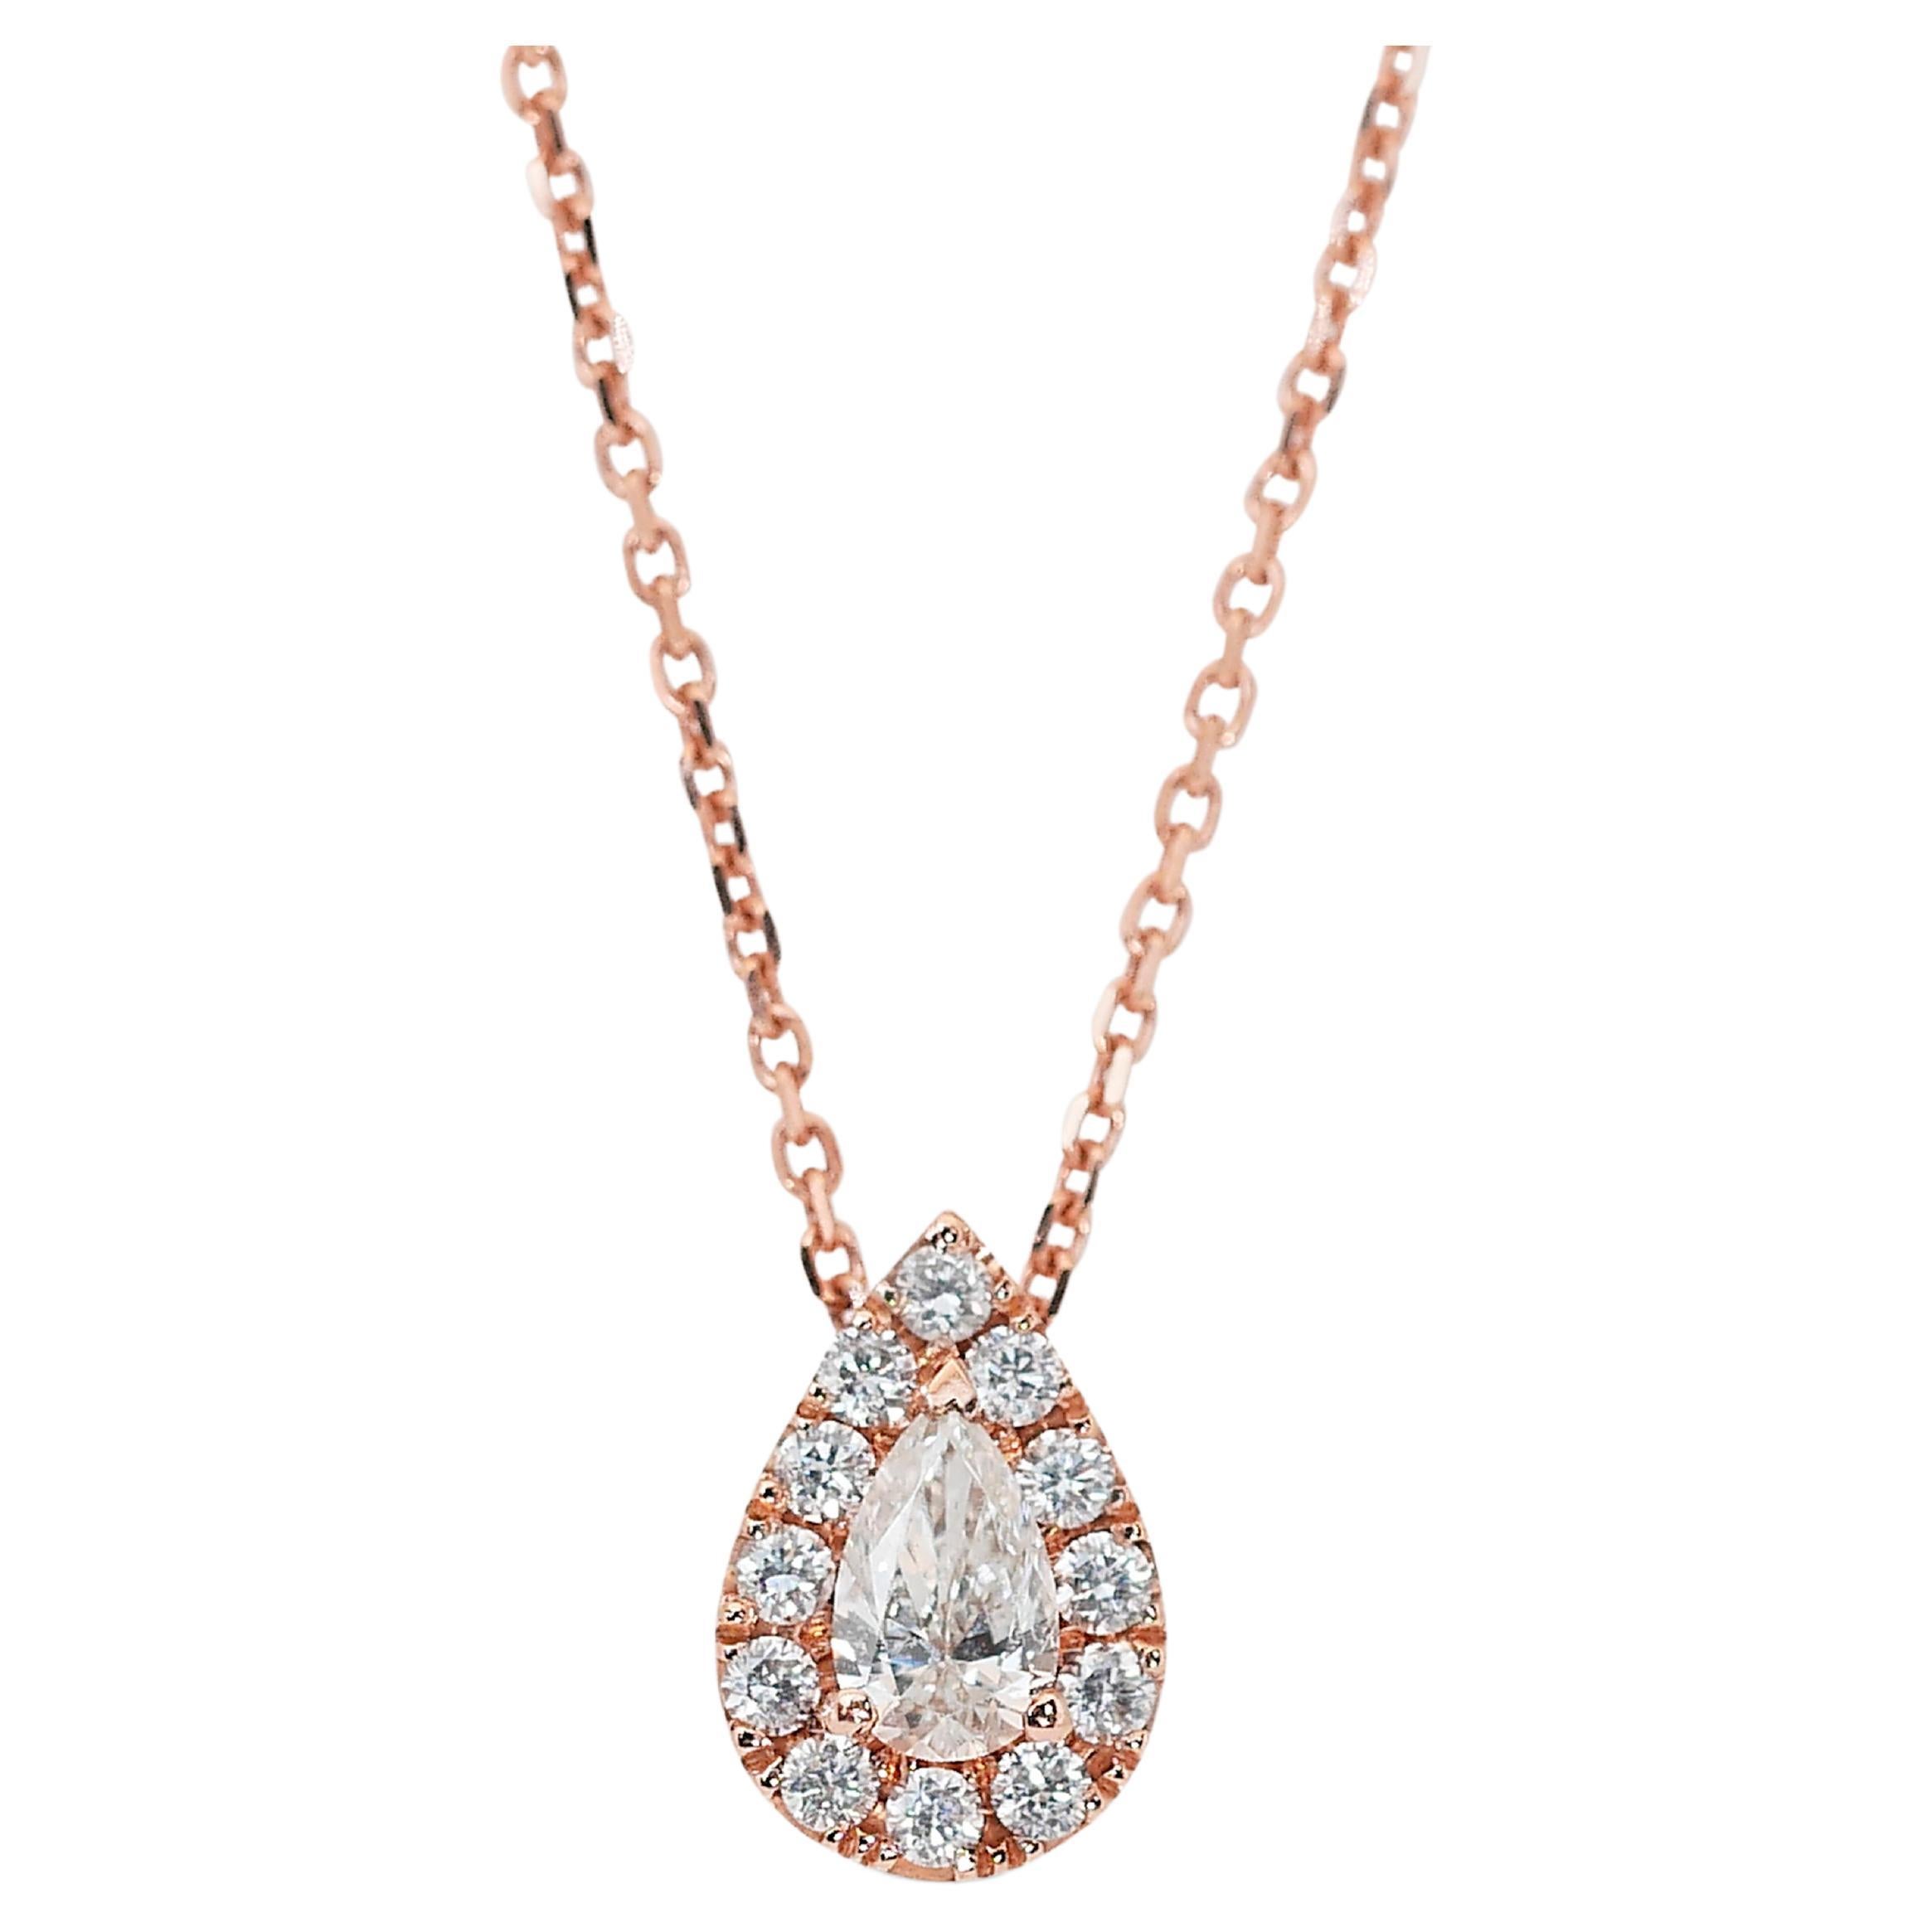 Elegant 0.42ct Diamond Halo Necklace in 14k Rose Gold - AIG Certified